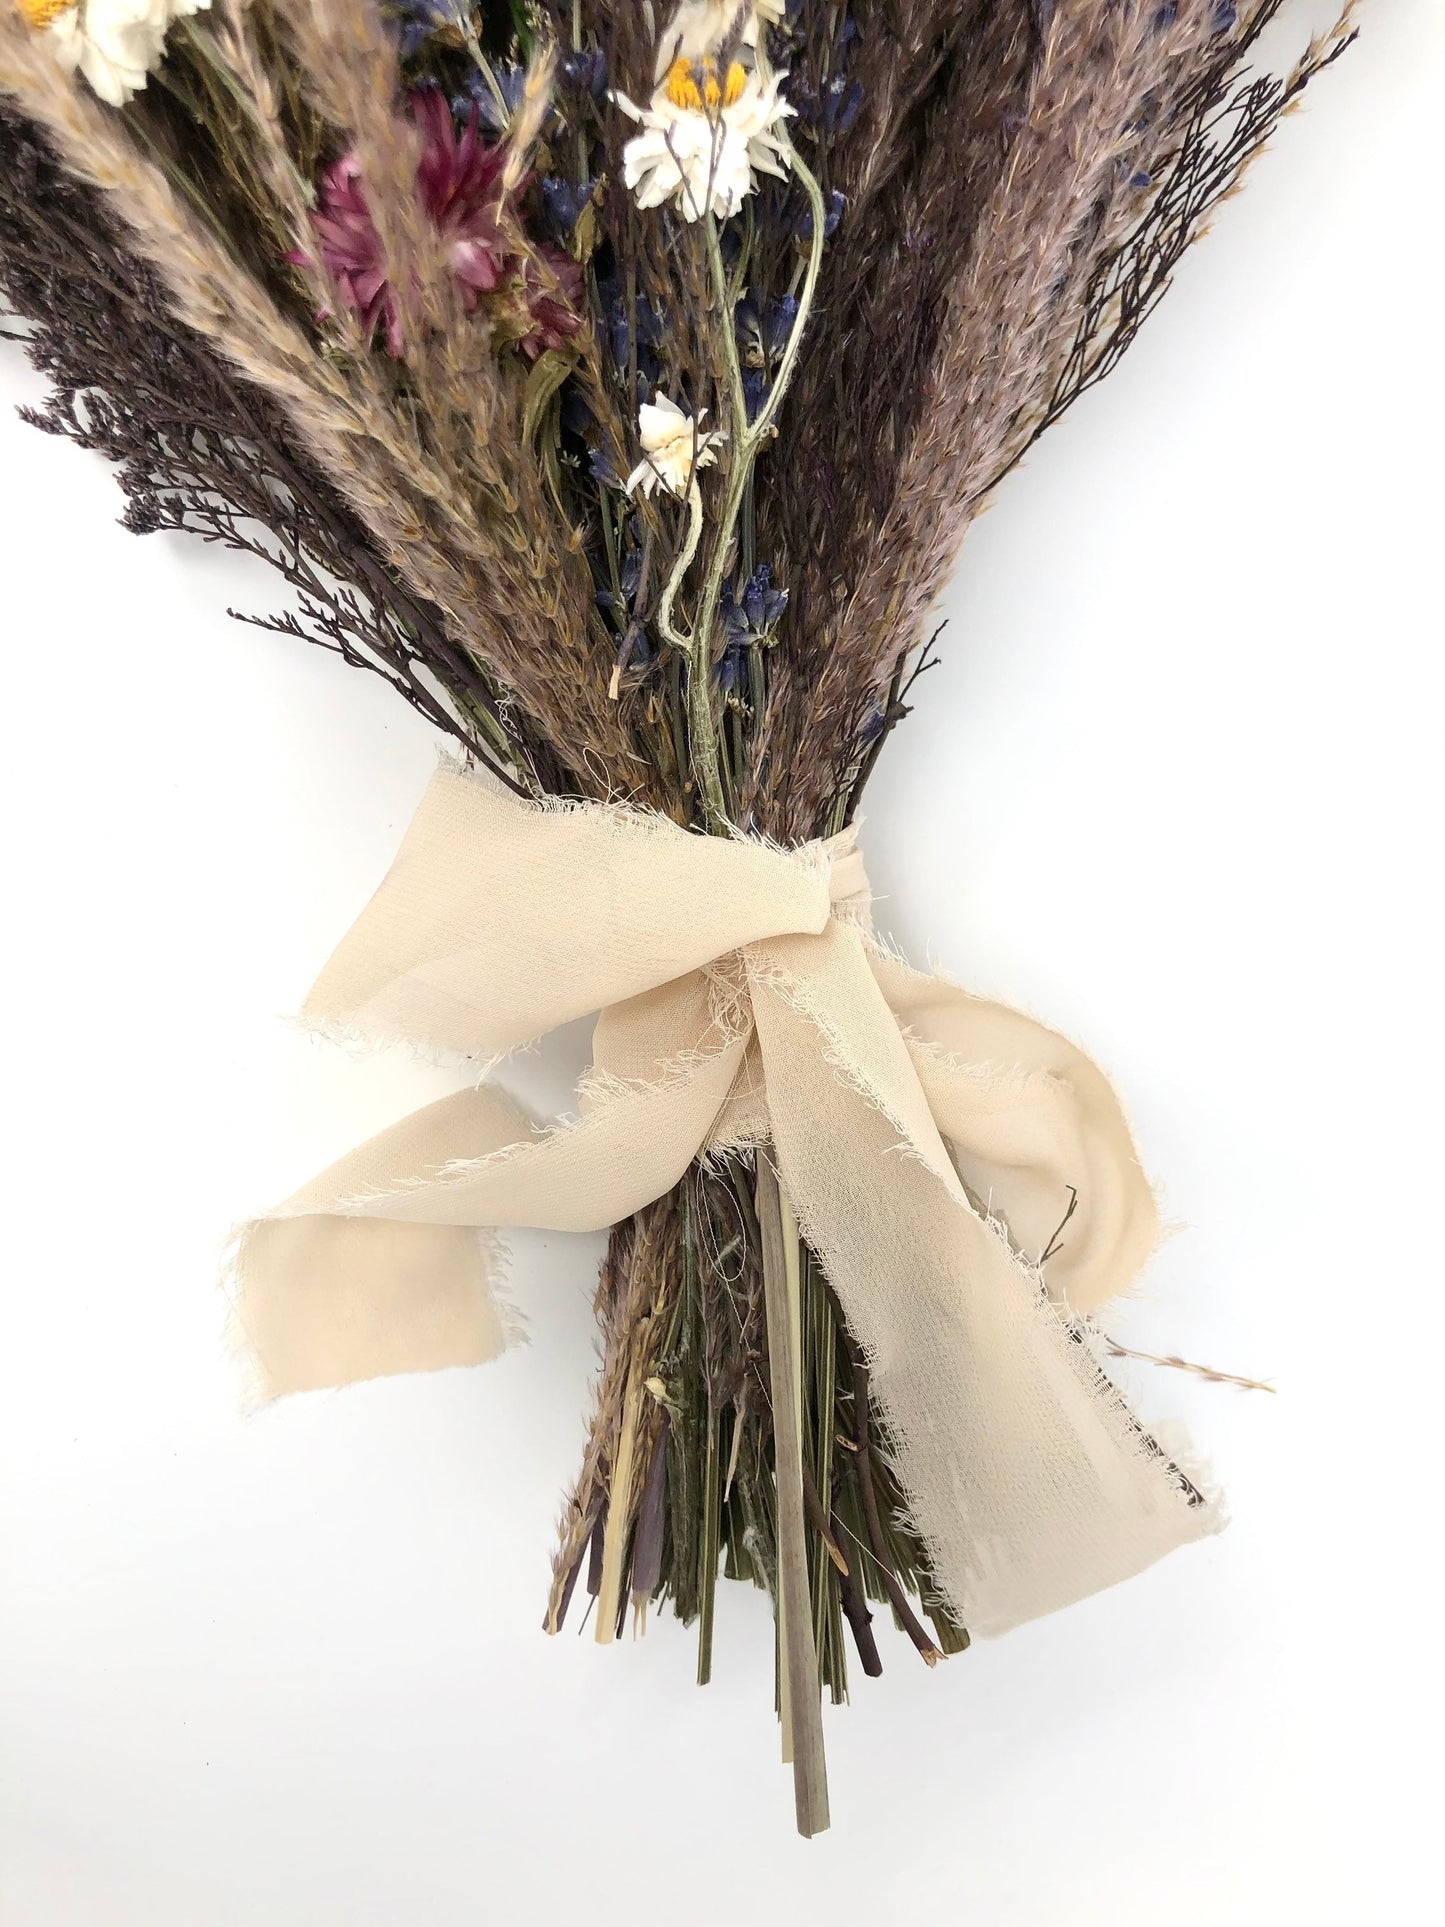 Wedding Bouquet, Dried Flowers, Beige, Brown, Purple, Fall, Wildflowers, Modern, Boho, Preserved, Floral, Pampas, Feather Grass